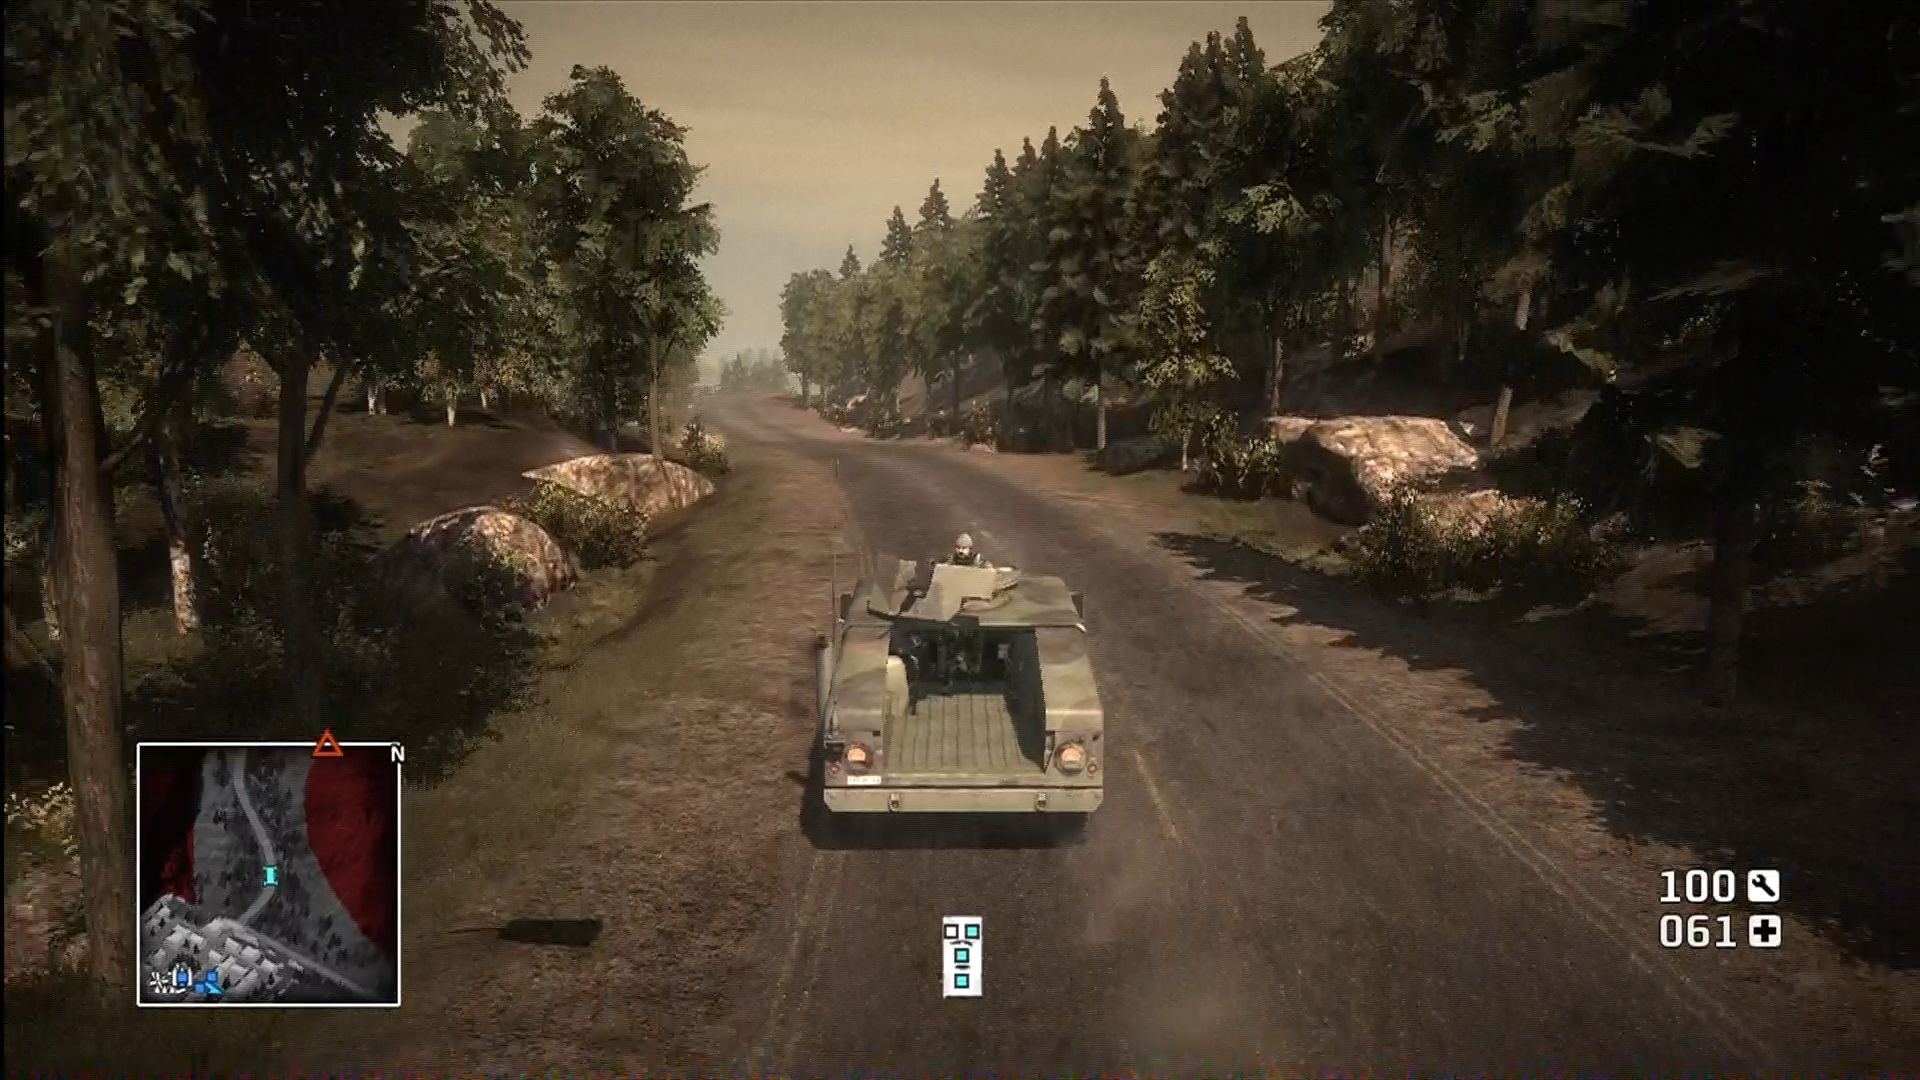 Military vehicle driving down road in foresty terrain.